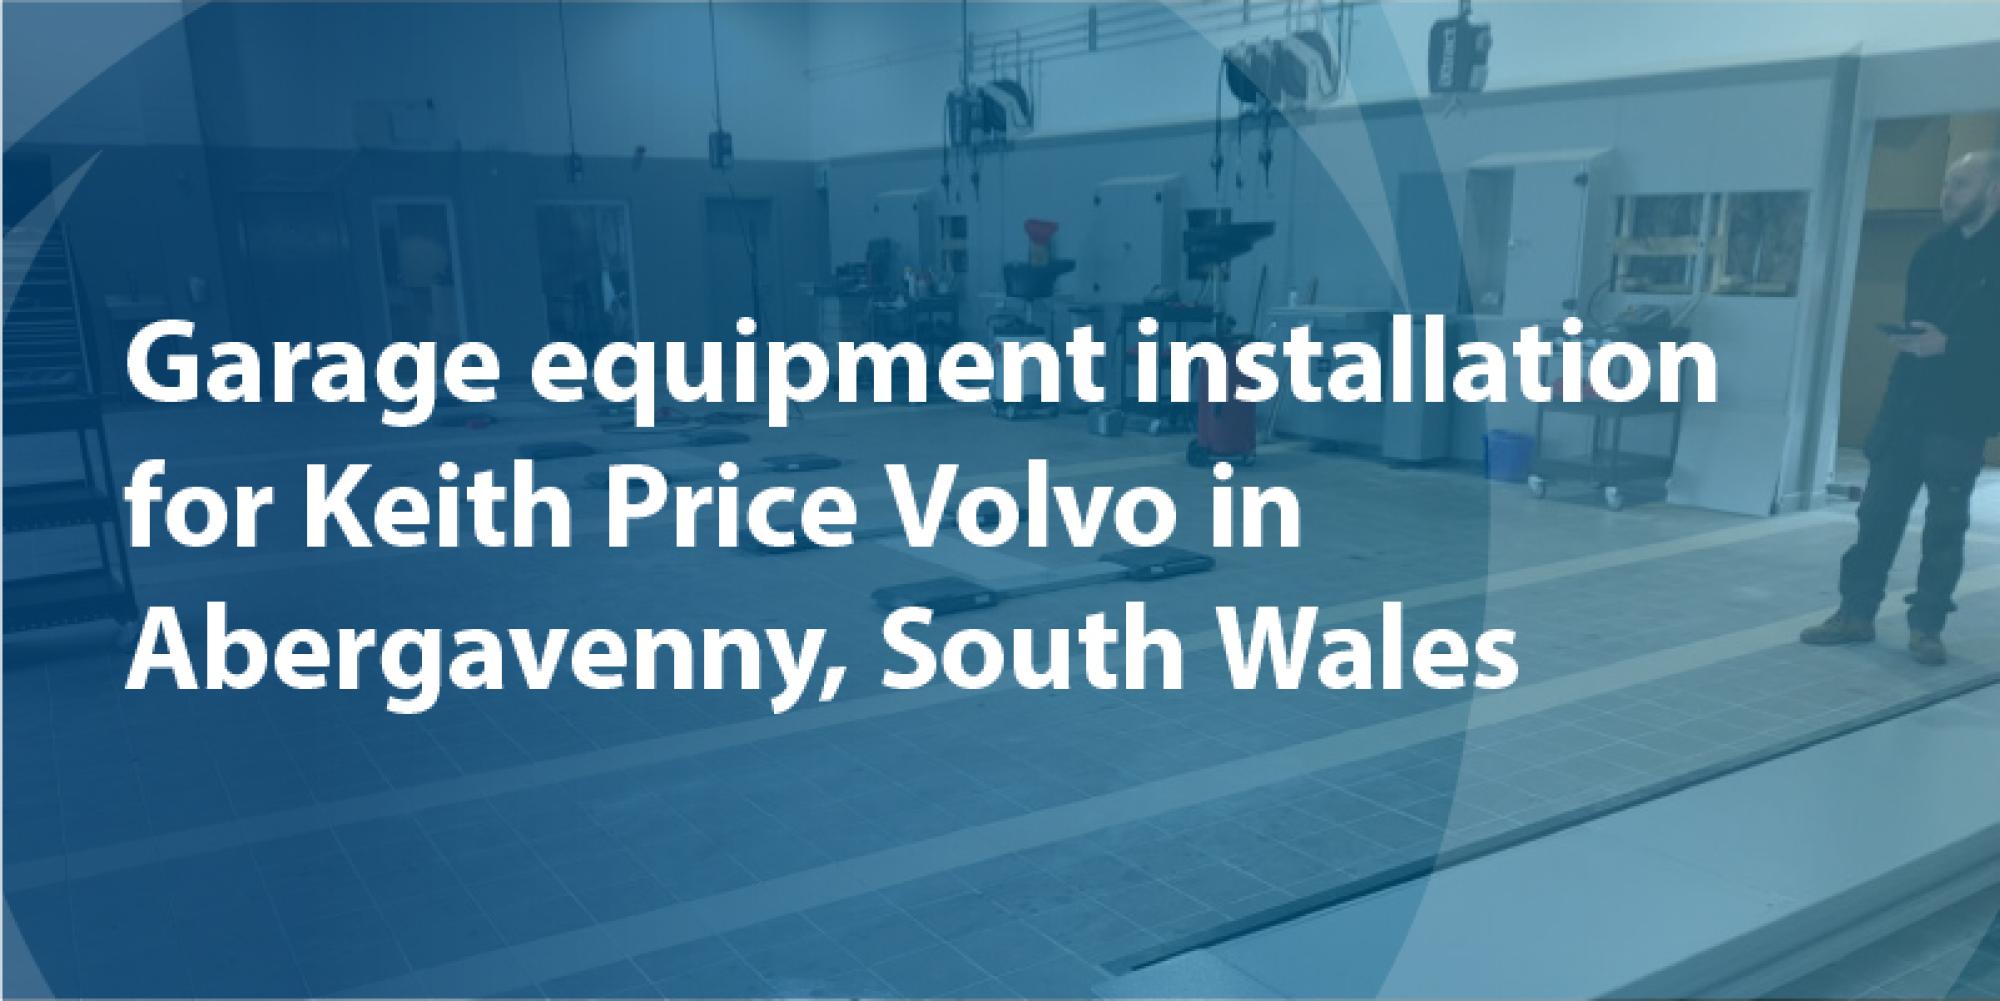 🔧 Project Update: CCS hands over garage equipment installation for Keith Price Volvo in Abergavenny, South Wales